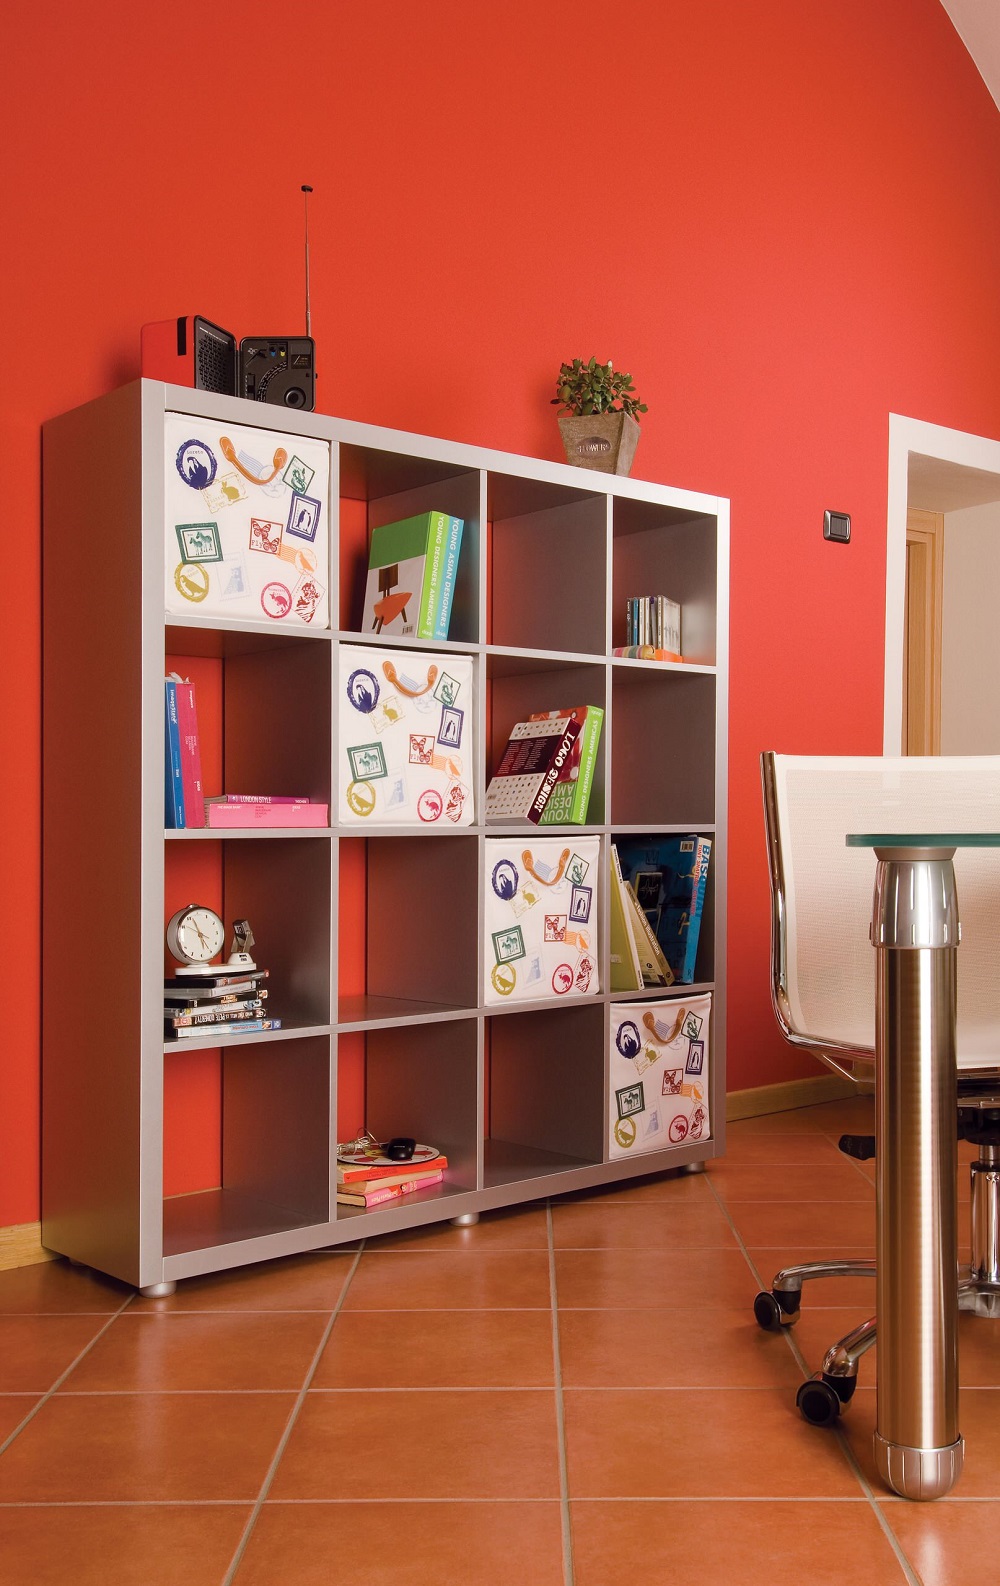 t2-59 Basement storage ideas to help you organize your space better